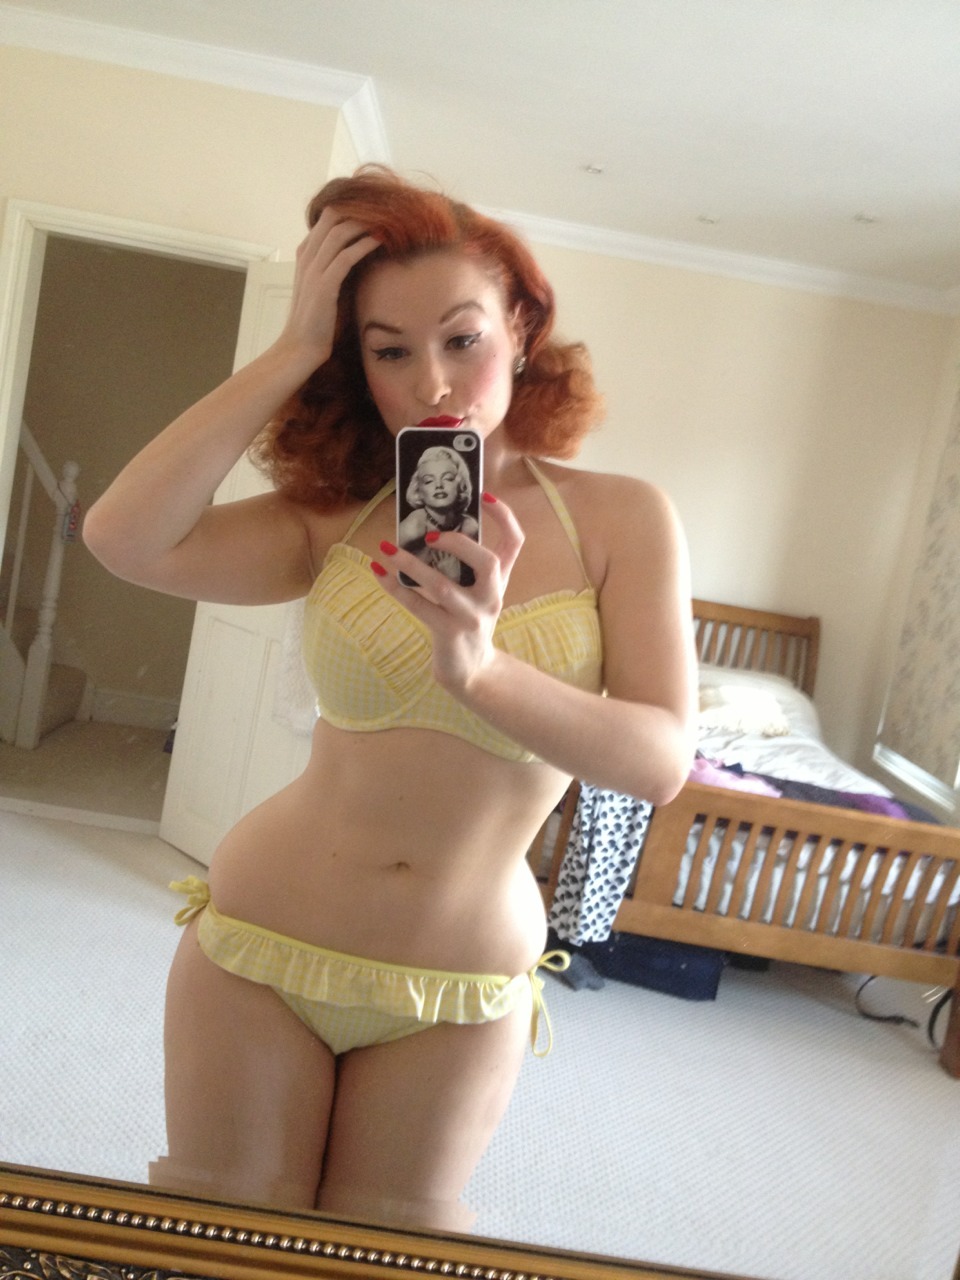 demiilauren:  Scary but hereâ€™s my bikini post as suggested. I feel happy with